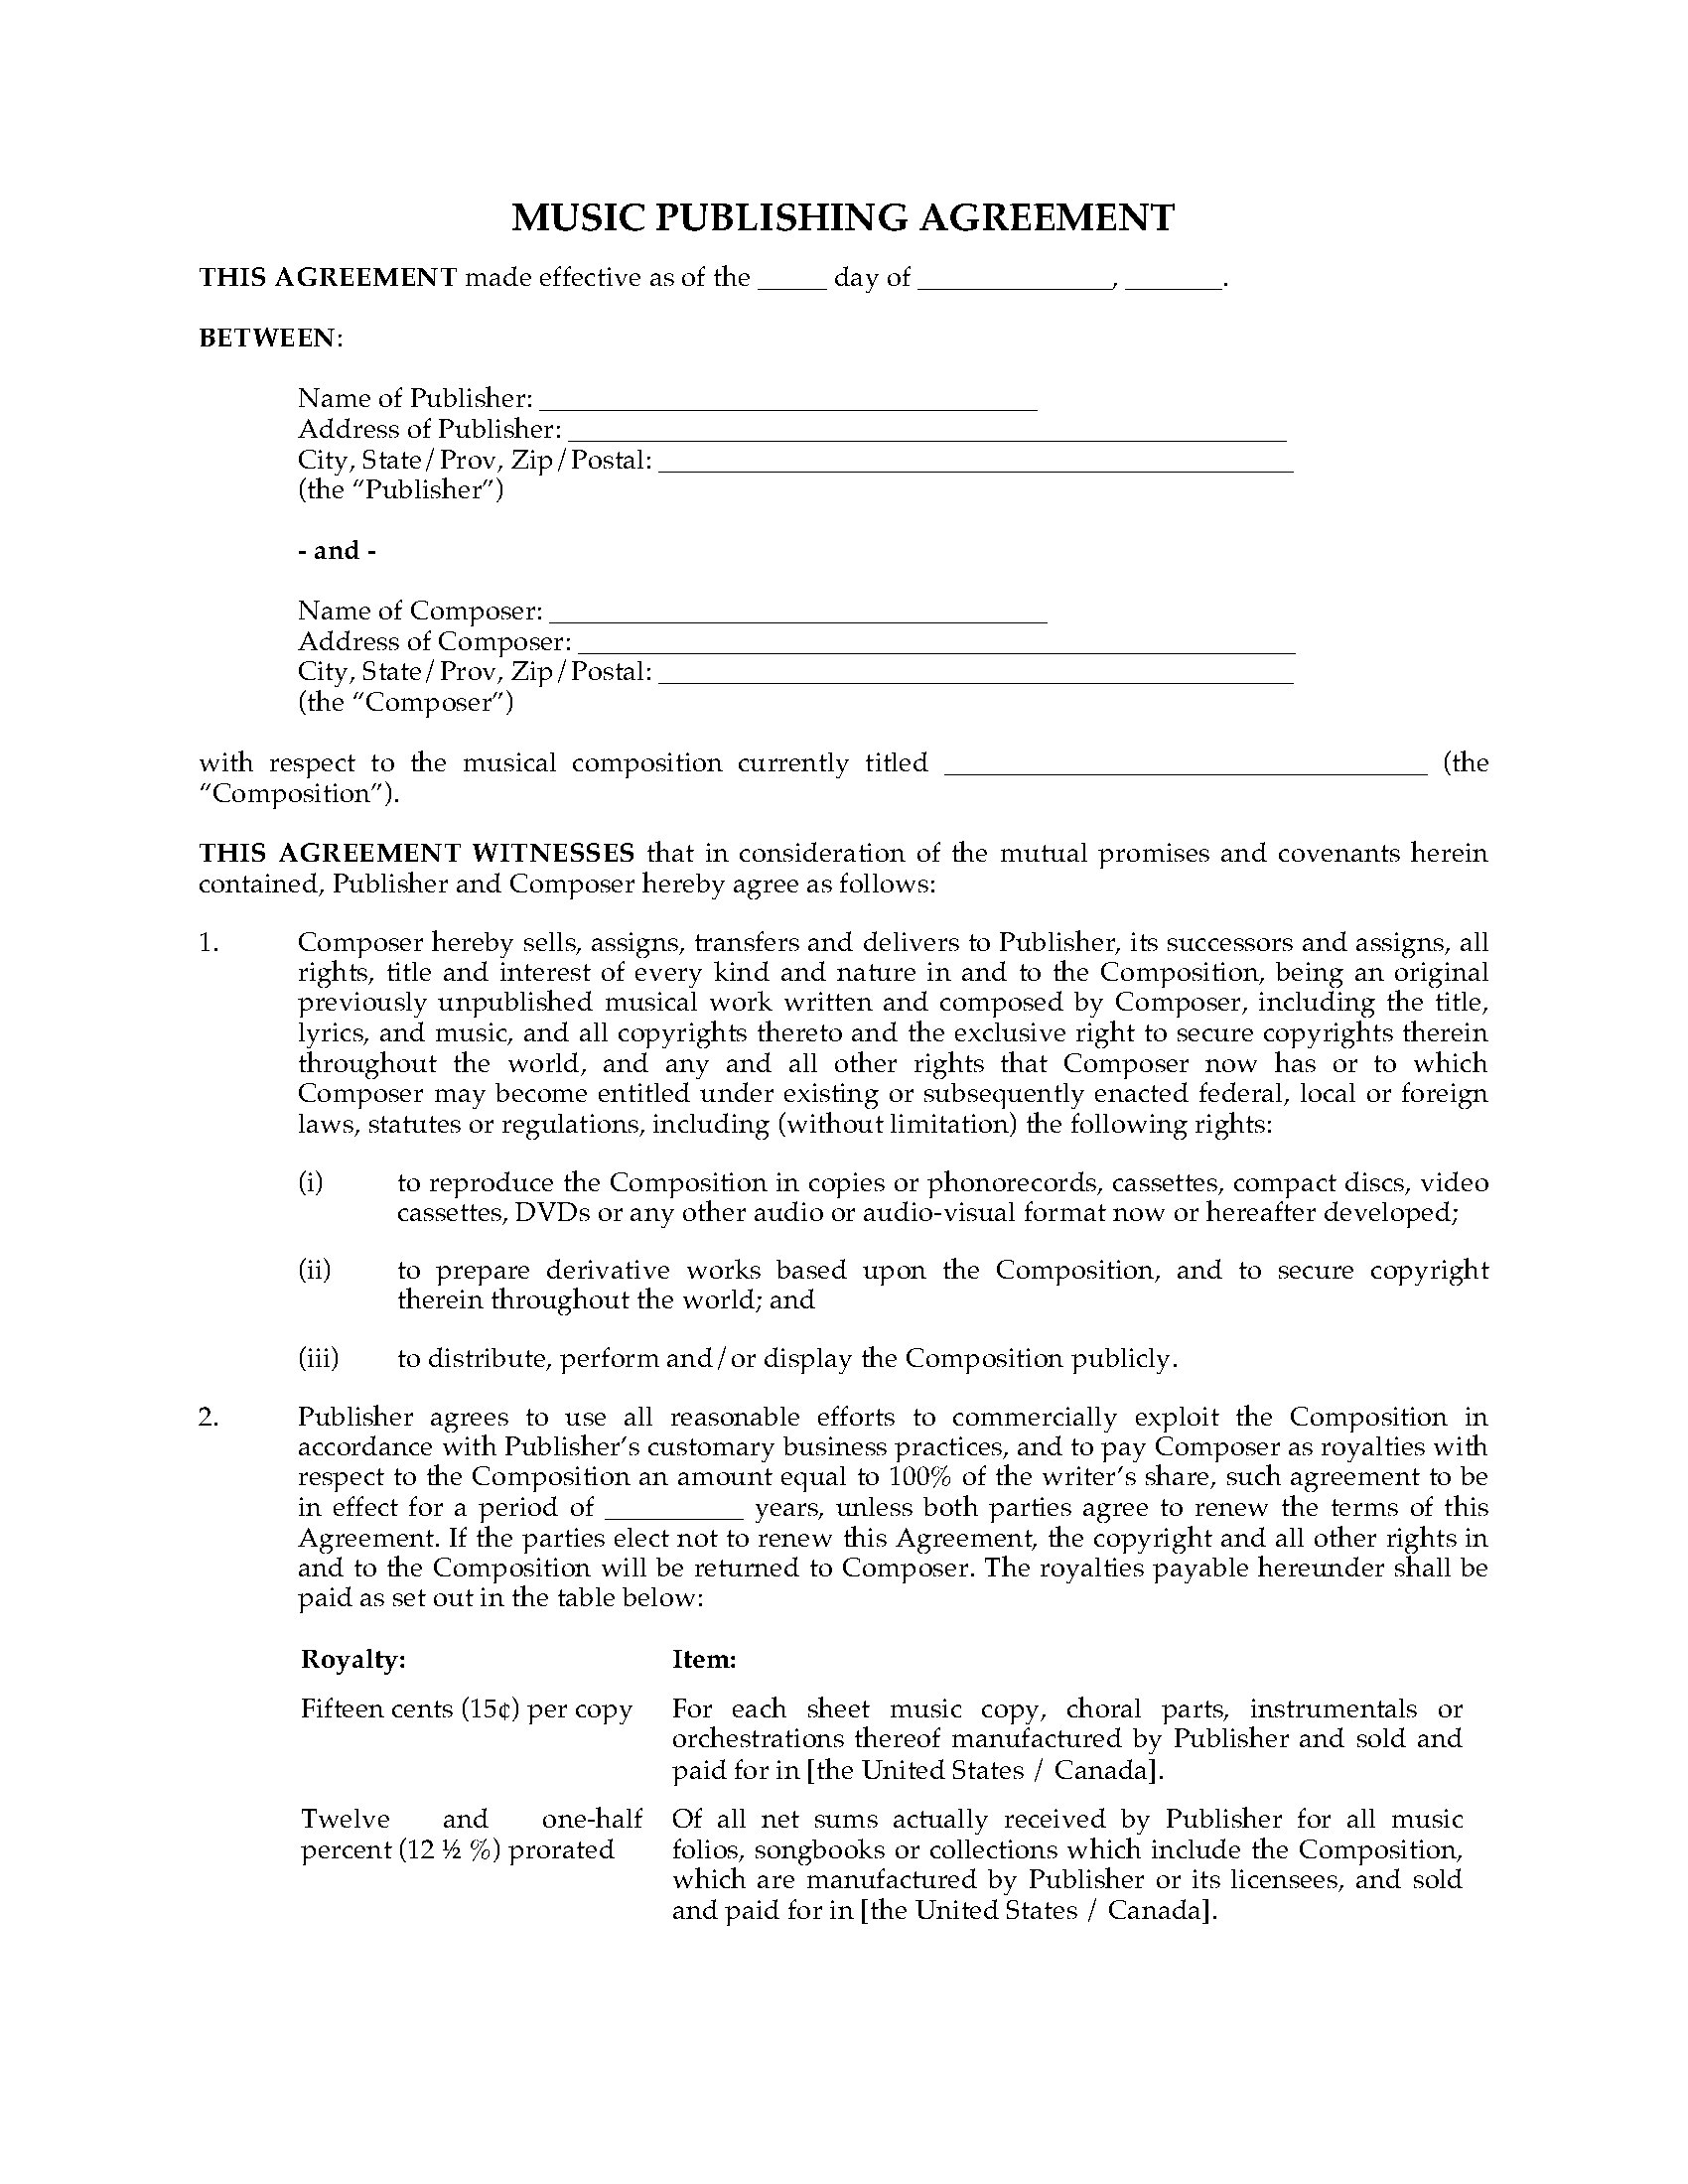 Music Publishing Agreement Legal Forms and Business Templates